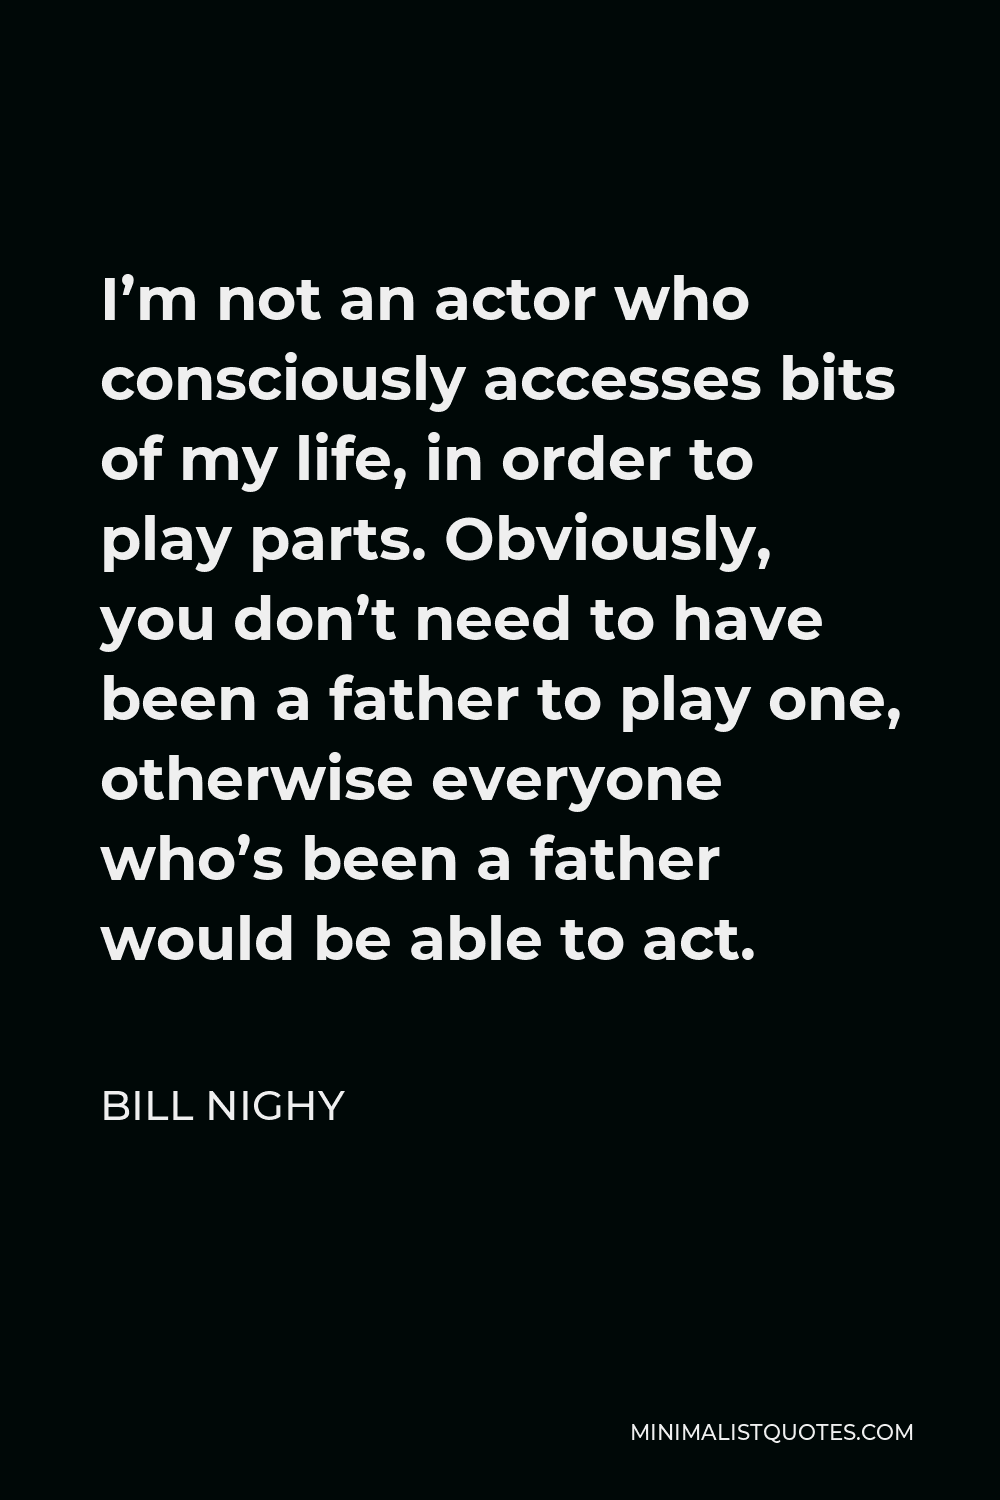 Bill Nighy Quote - I’m not an actor who consciously accesses bits of my life, in order to play parts. Obviously, you don’t need to have been a father to play one, otherwise everyone who’s been a father would be able to act.